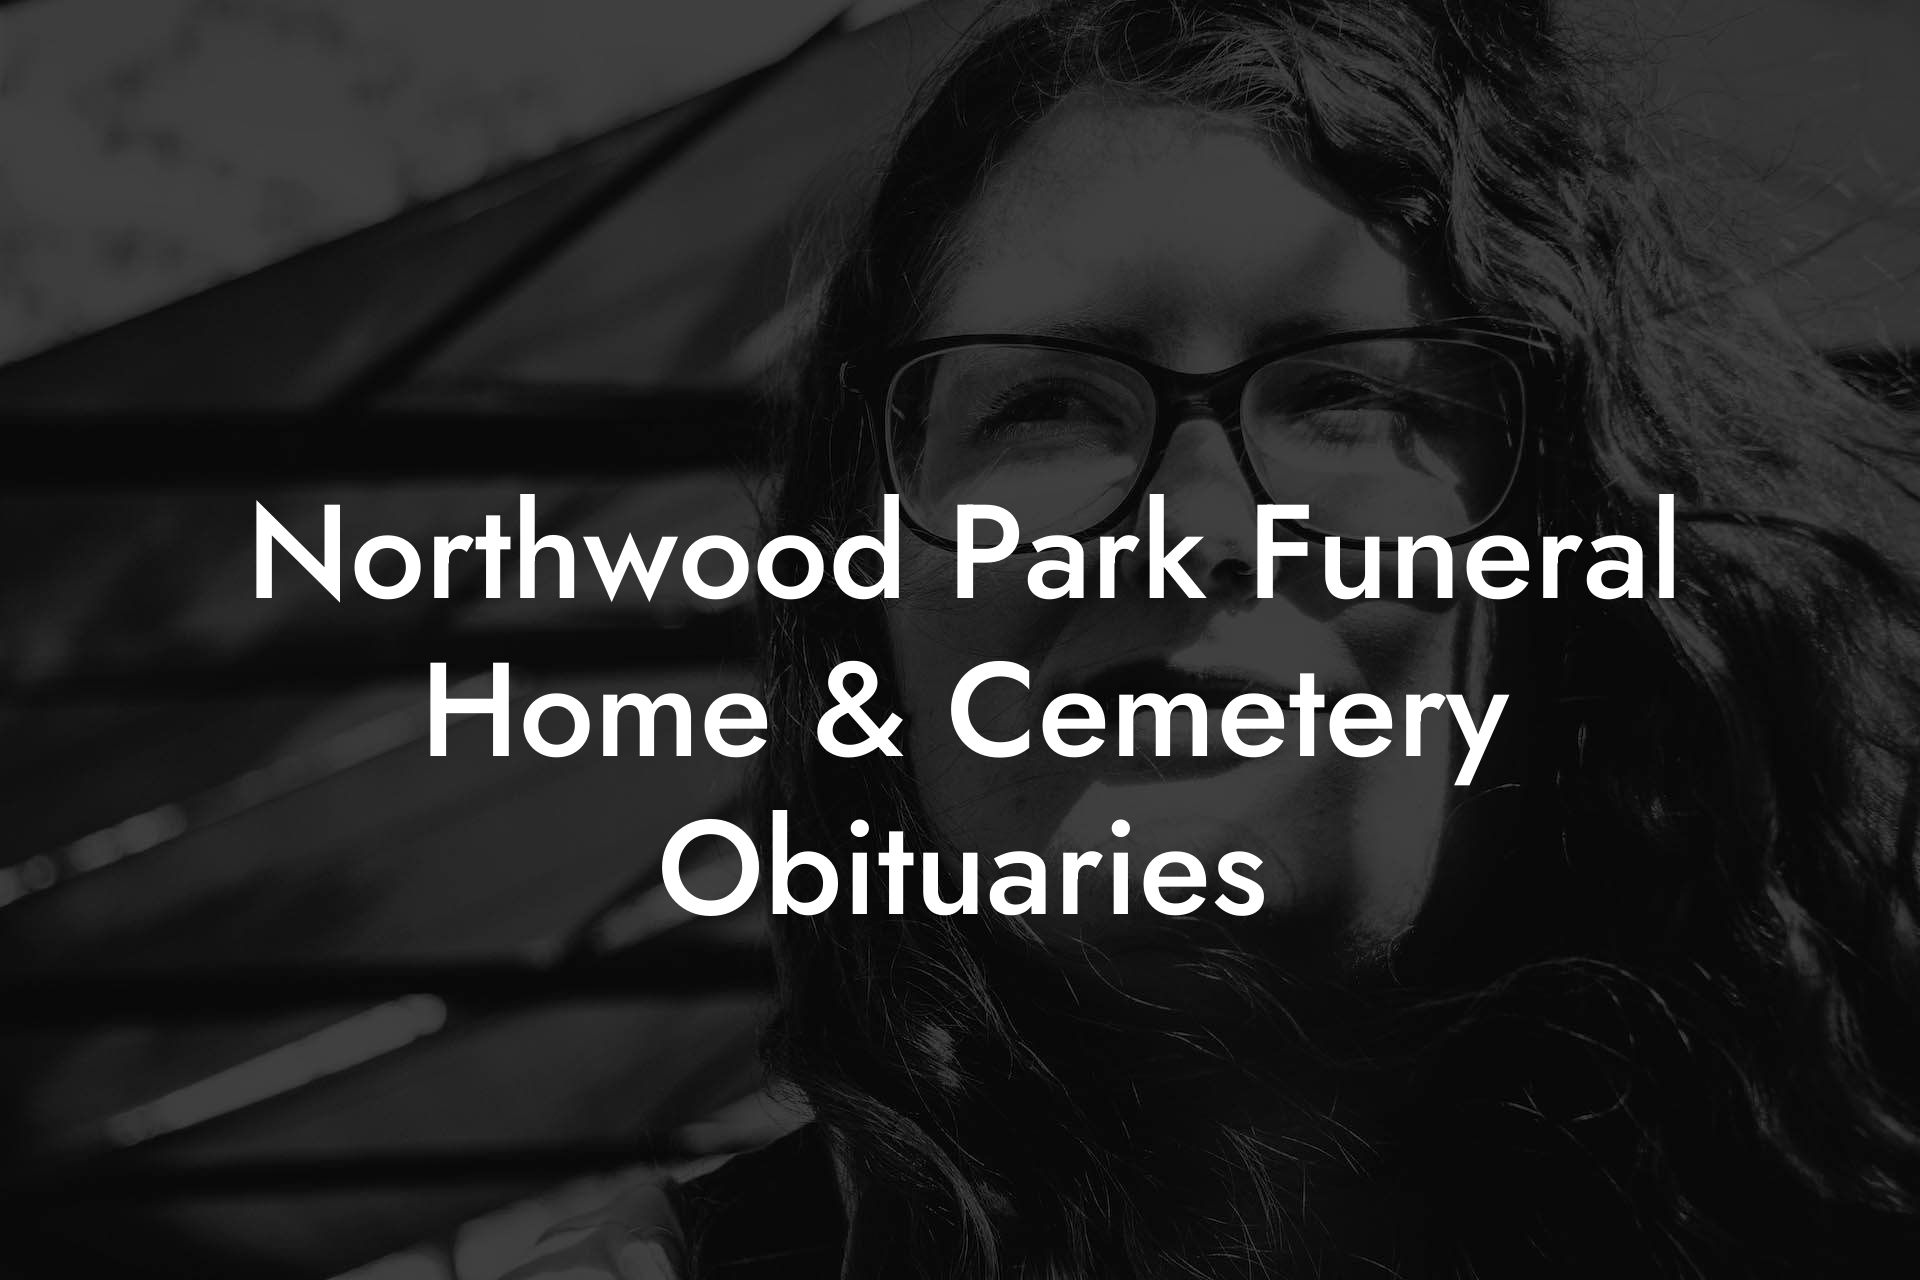 Northwood Park Funeral Home & Cemetery Obituaries